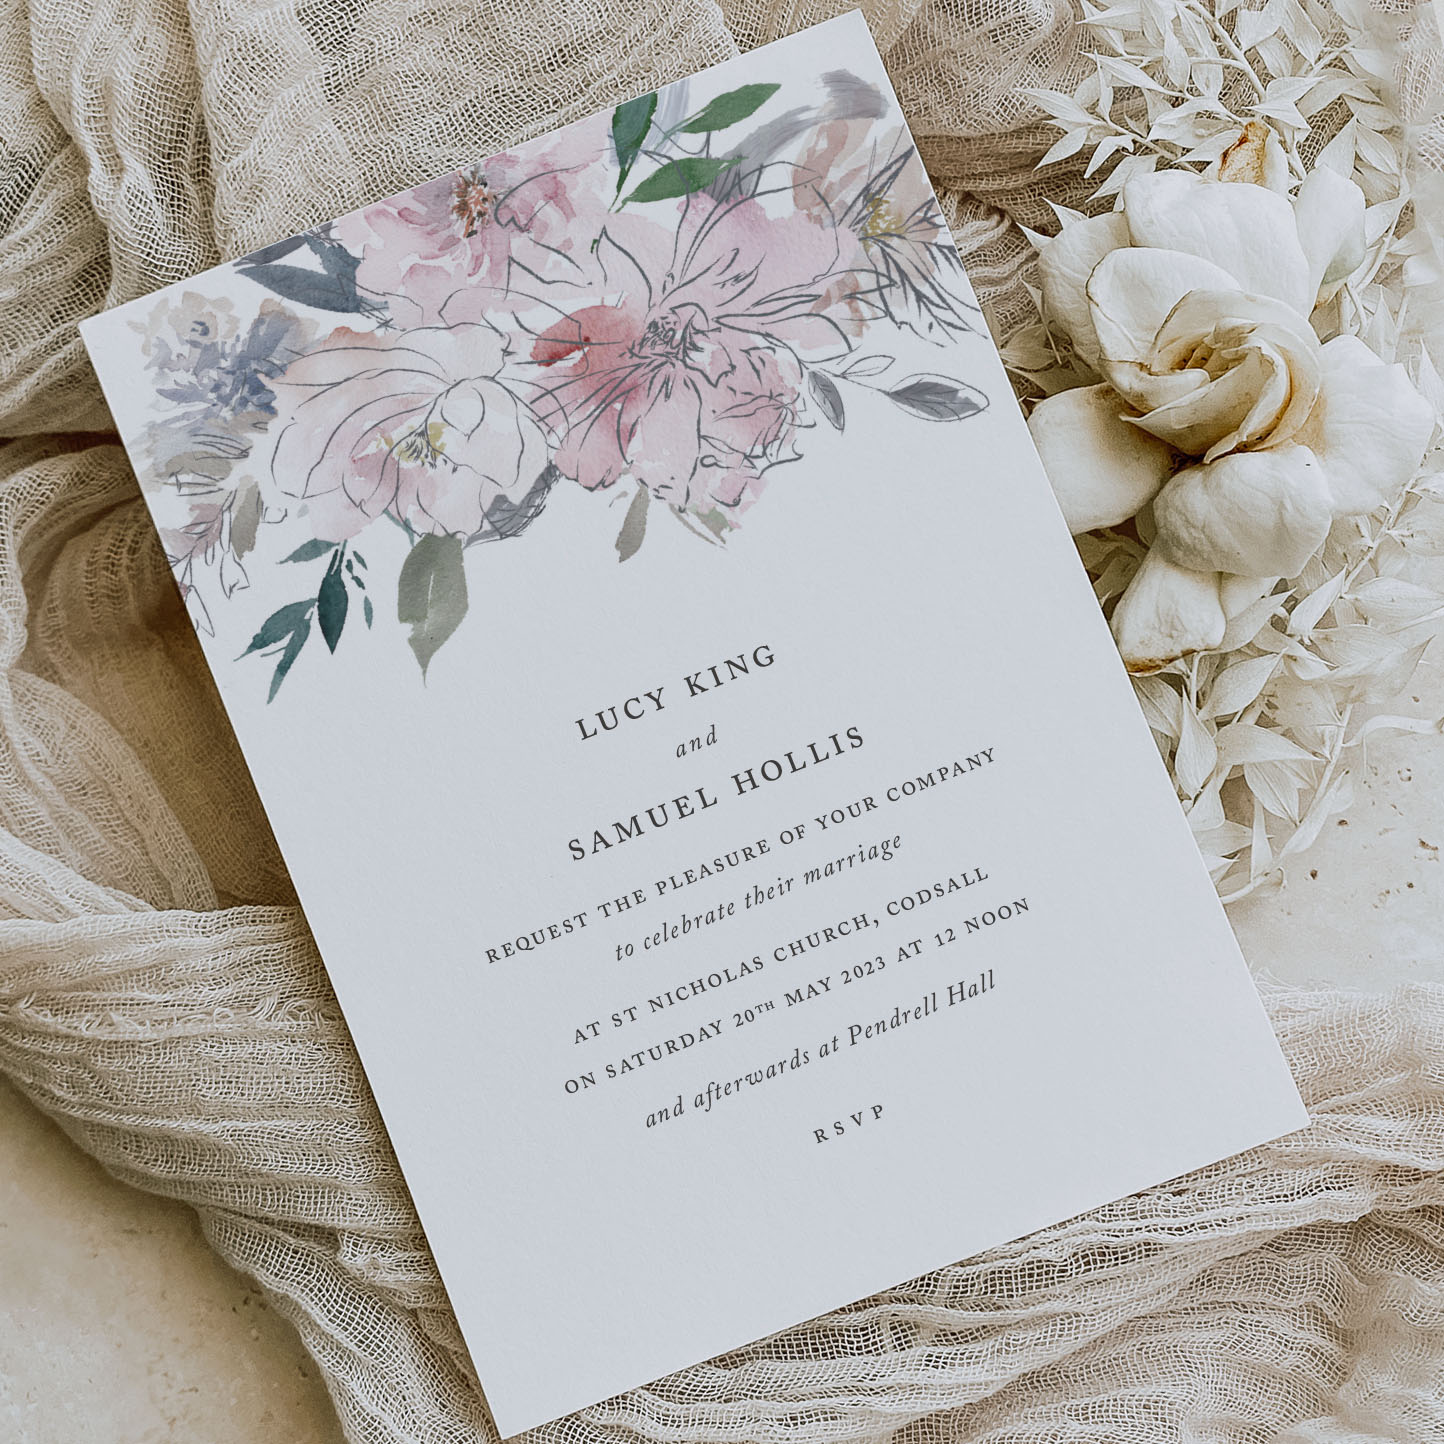 Romance - Romantic wedding invitations with muted floral illustration on white card shown on cream background